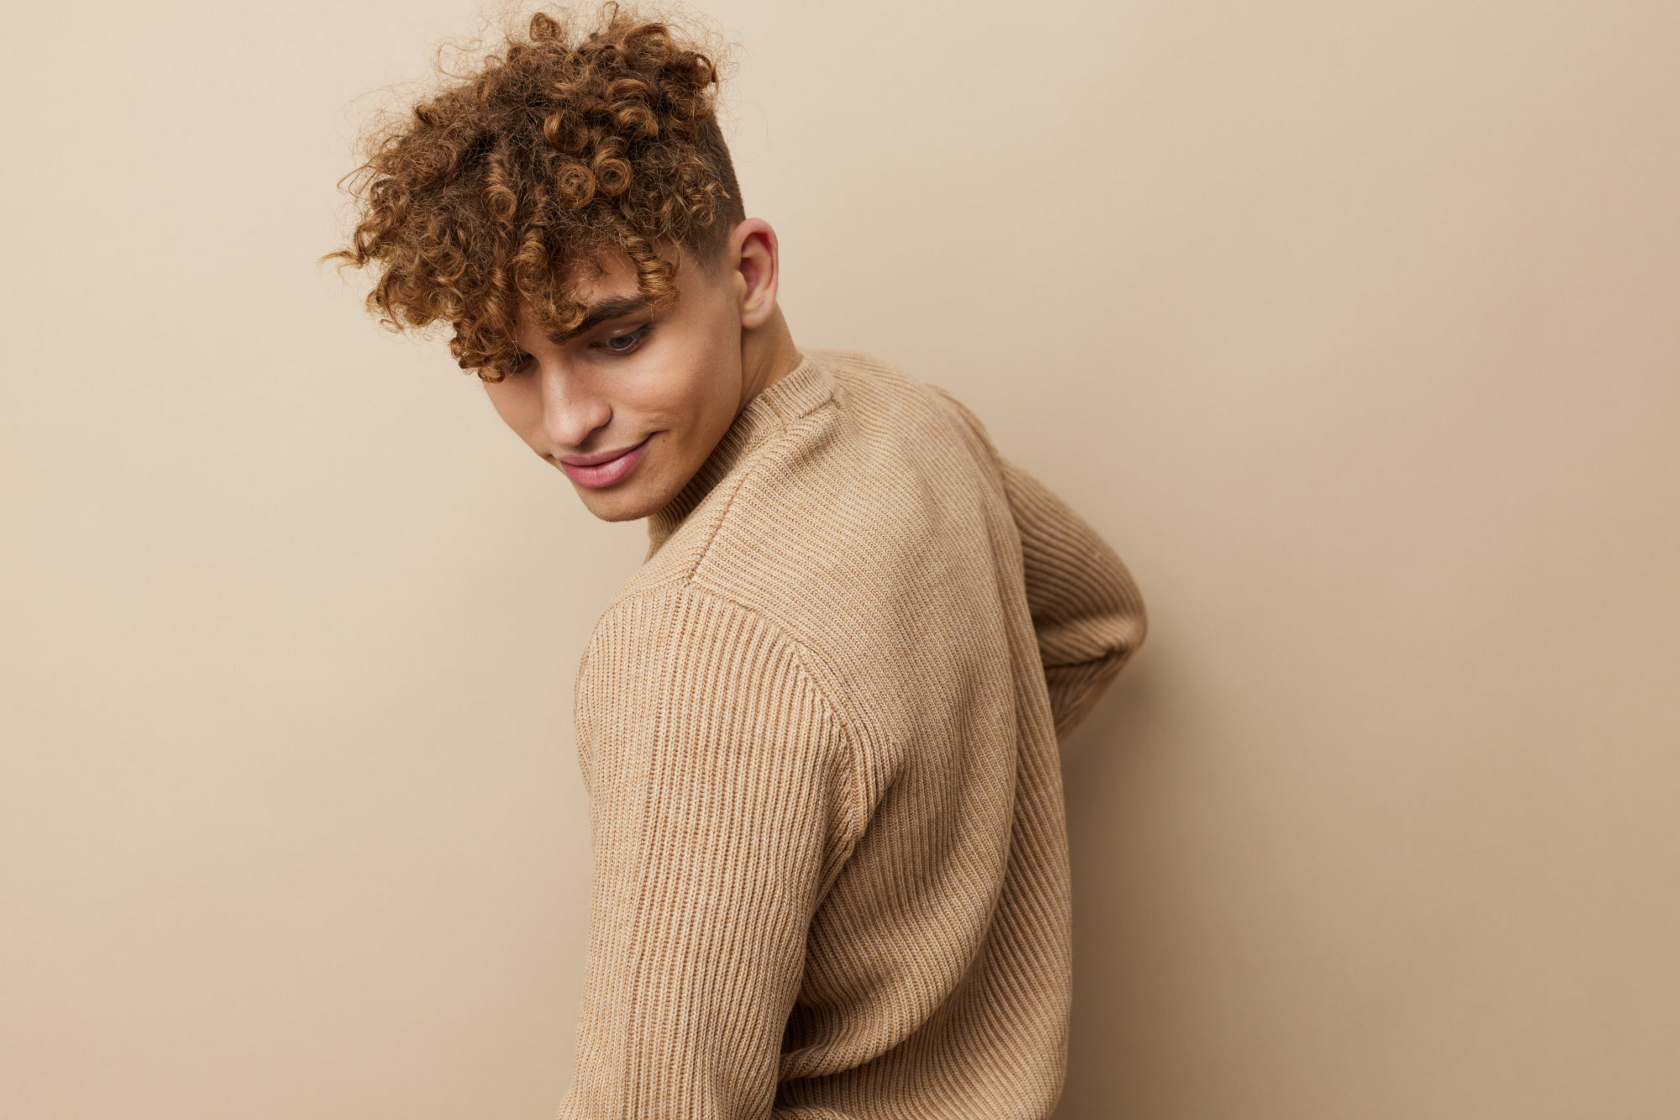 The 30 Best Tapered Haircuts for Natural Curls